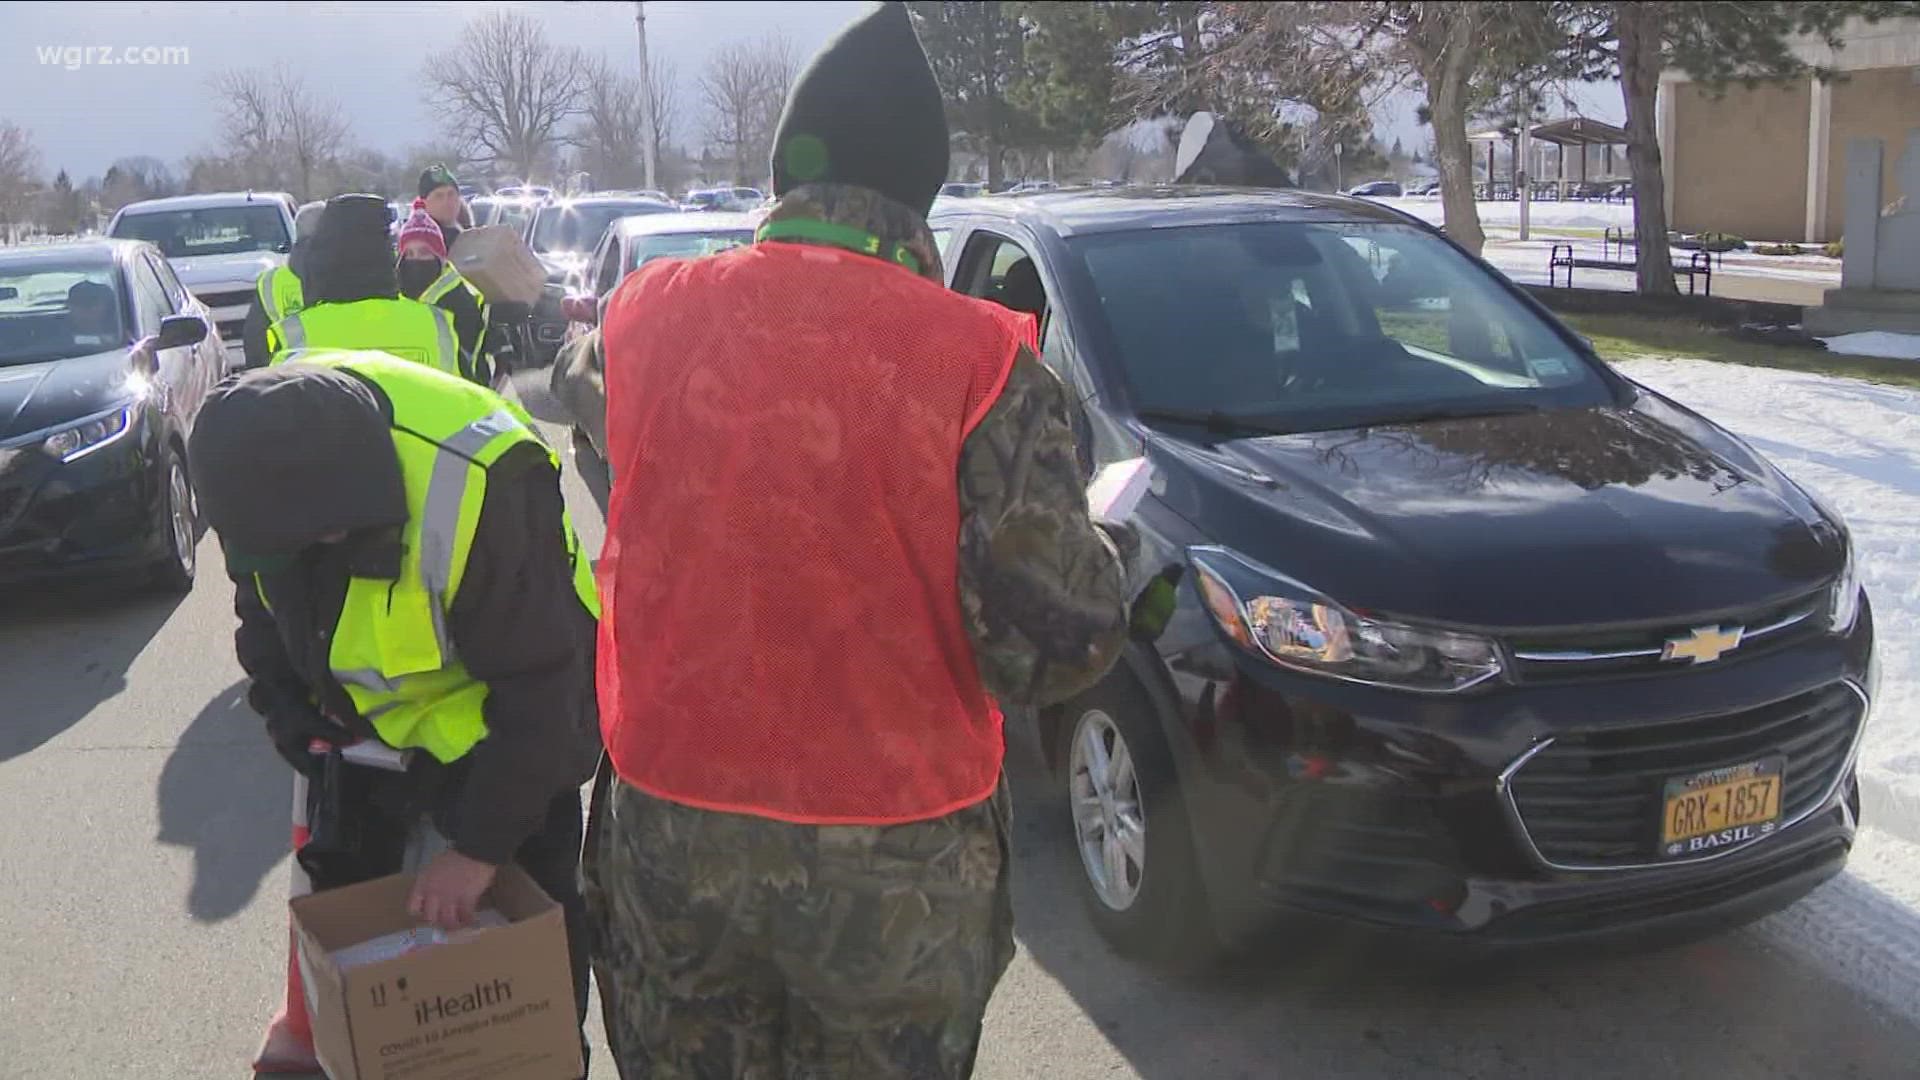 Each kit has two tests in it and kits were given to the municipalities based on population. Cars lined up on Harlem Road before the giveaway in Cheektowaga Monday.